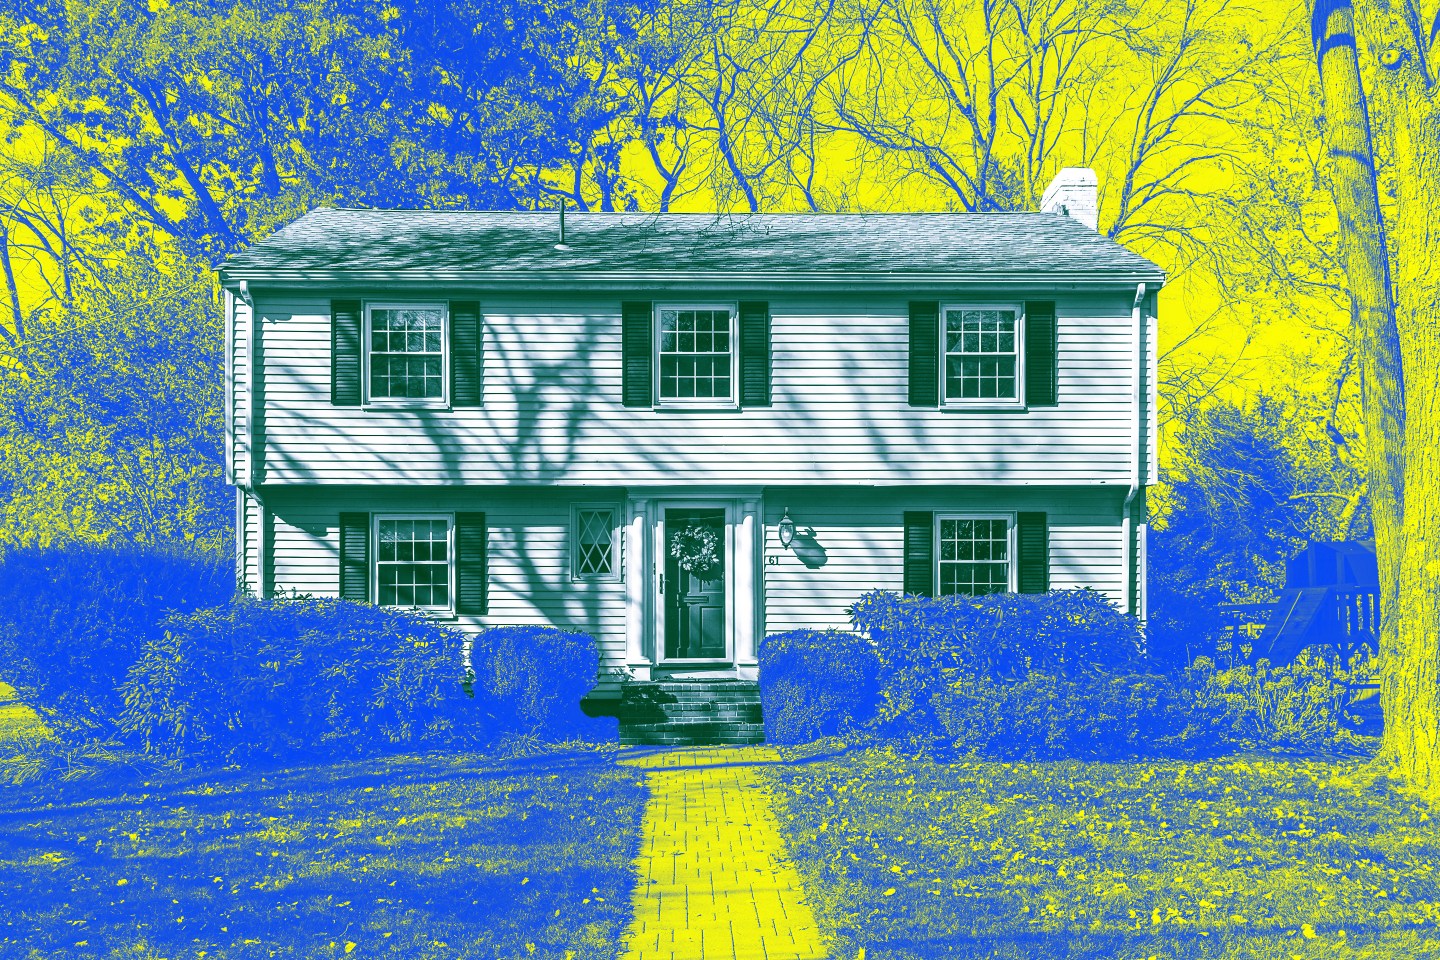 Photo of a two story house surrounded by a front yard and trees that's been treated with yellow and blue colors.